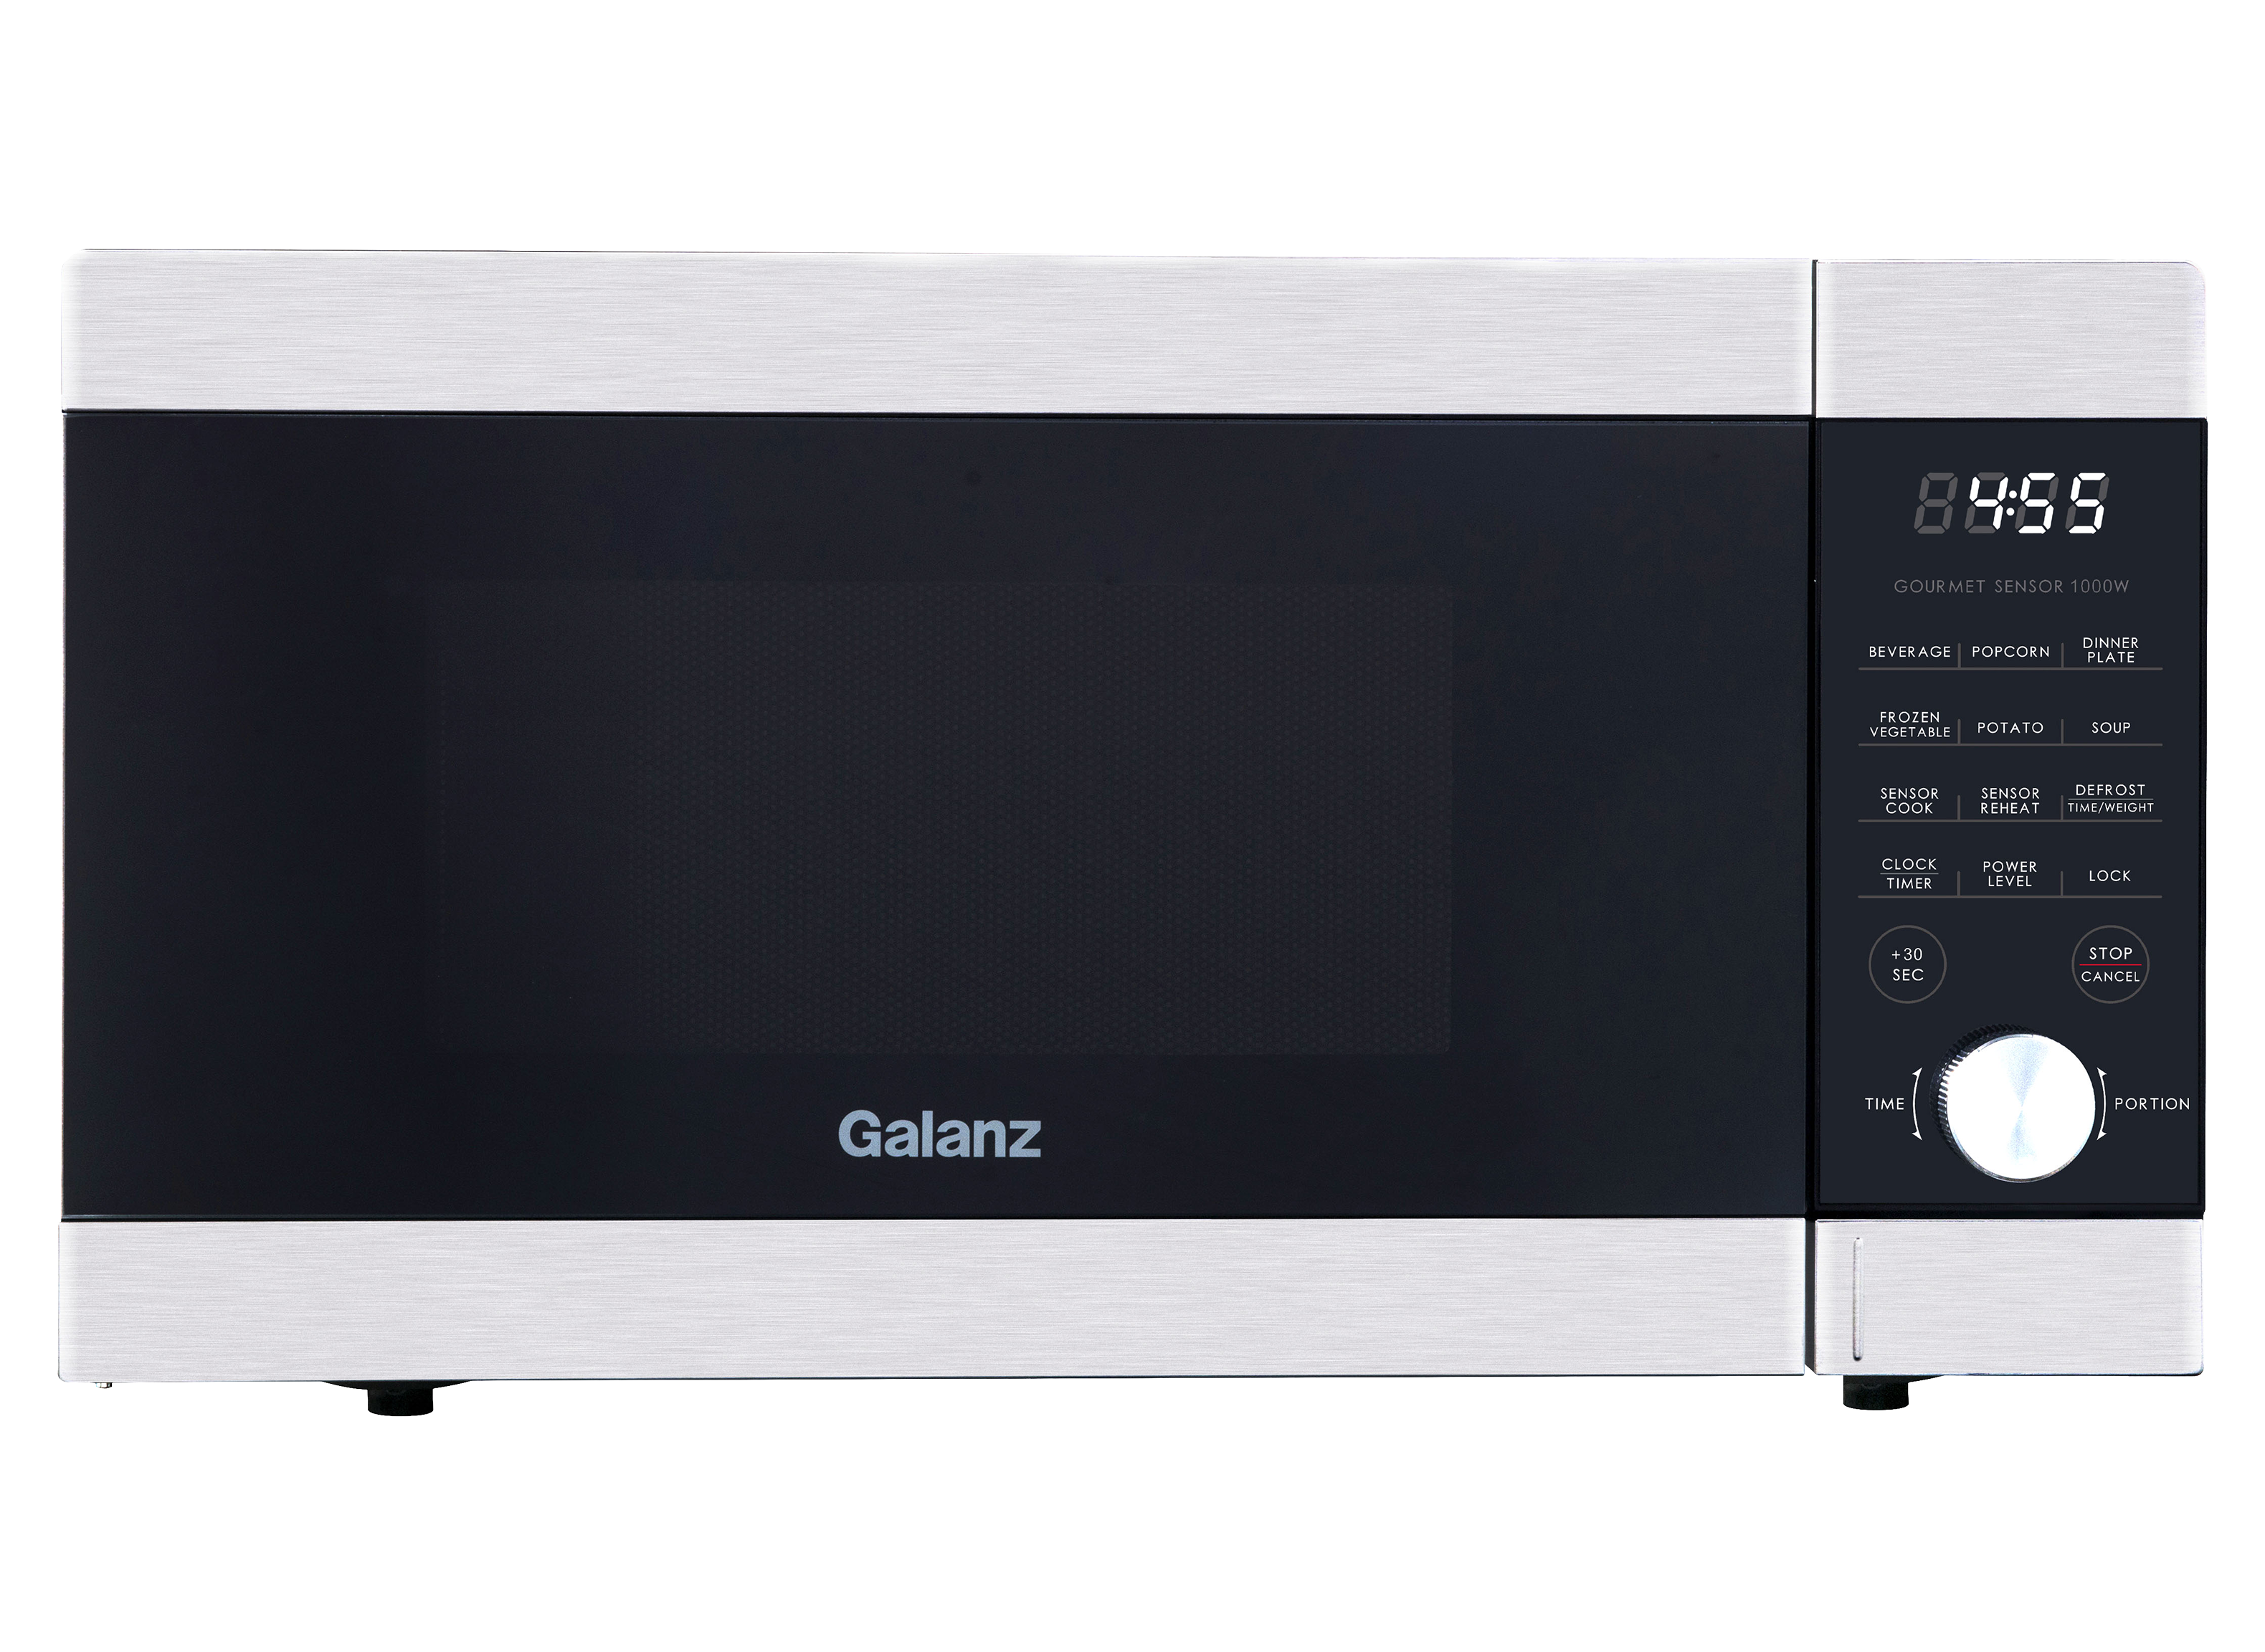 Galanz GSWWD11S1S10 Microwave Oven Review - Consumer Reports